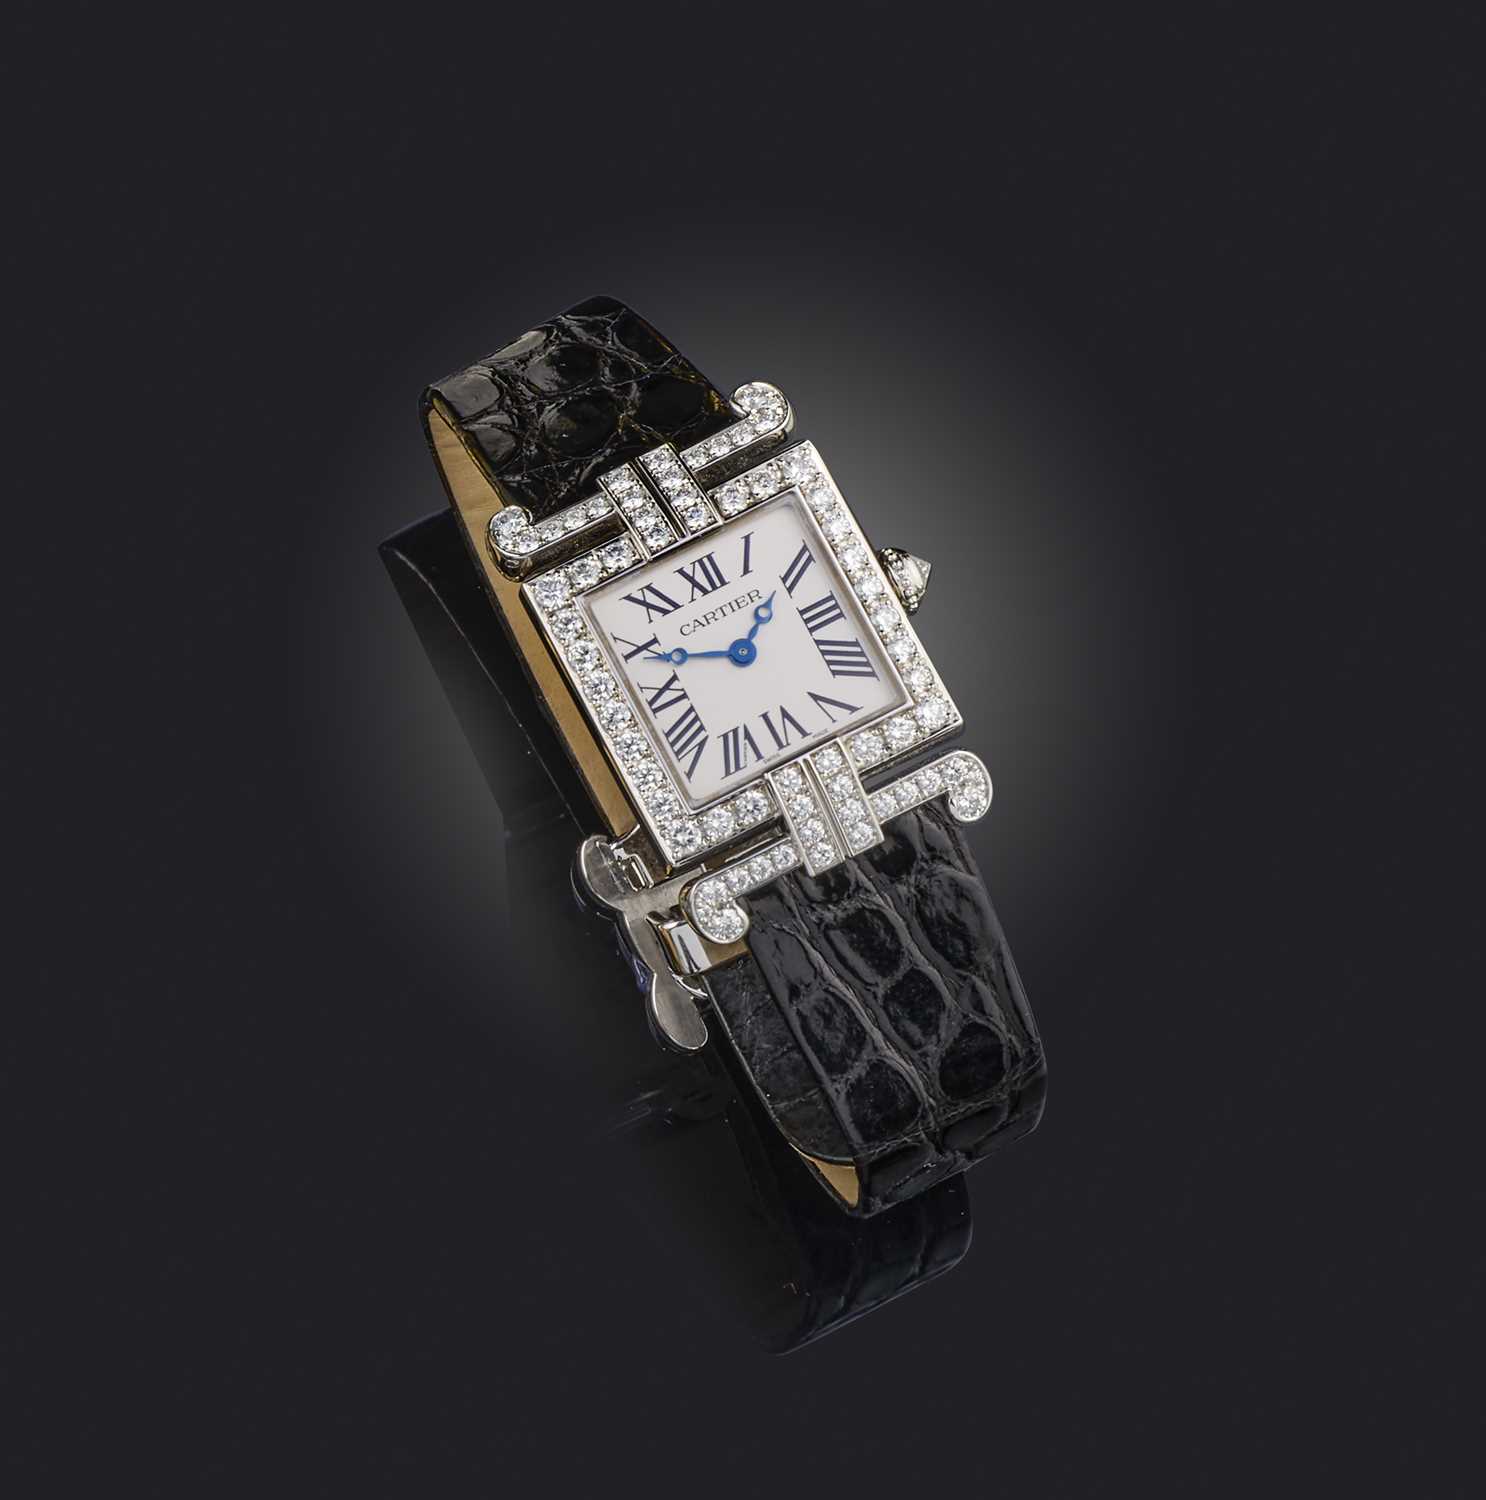 Cartier, a rare lady's platinum and diamond wristwatch, ref.3463, the signed square dial with